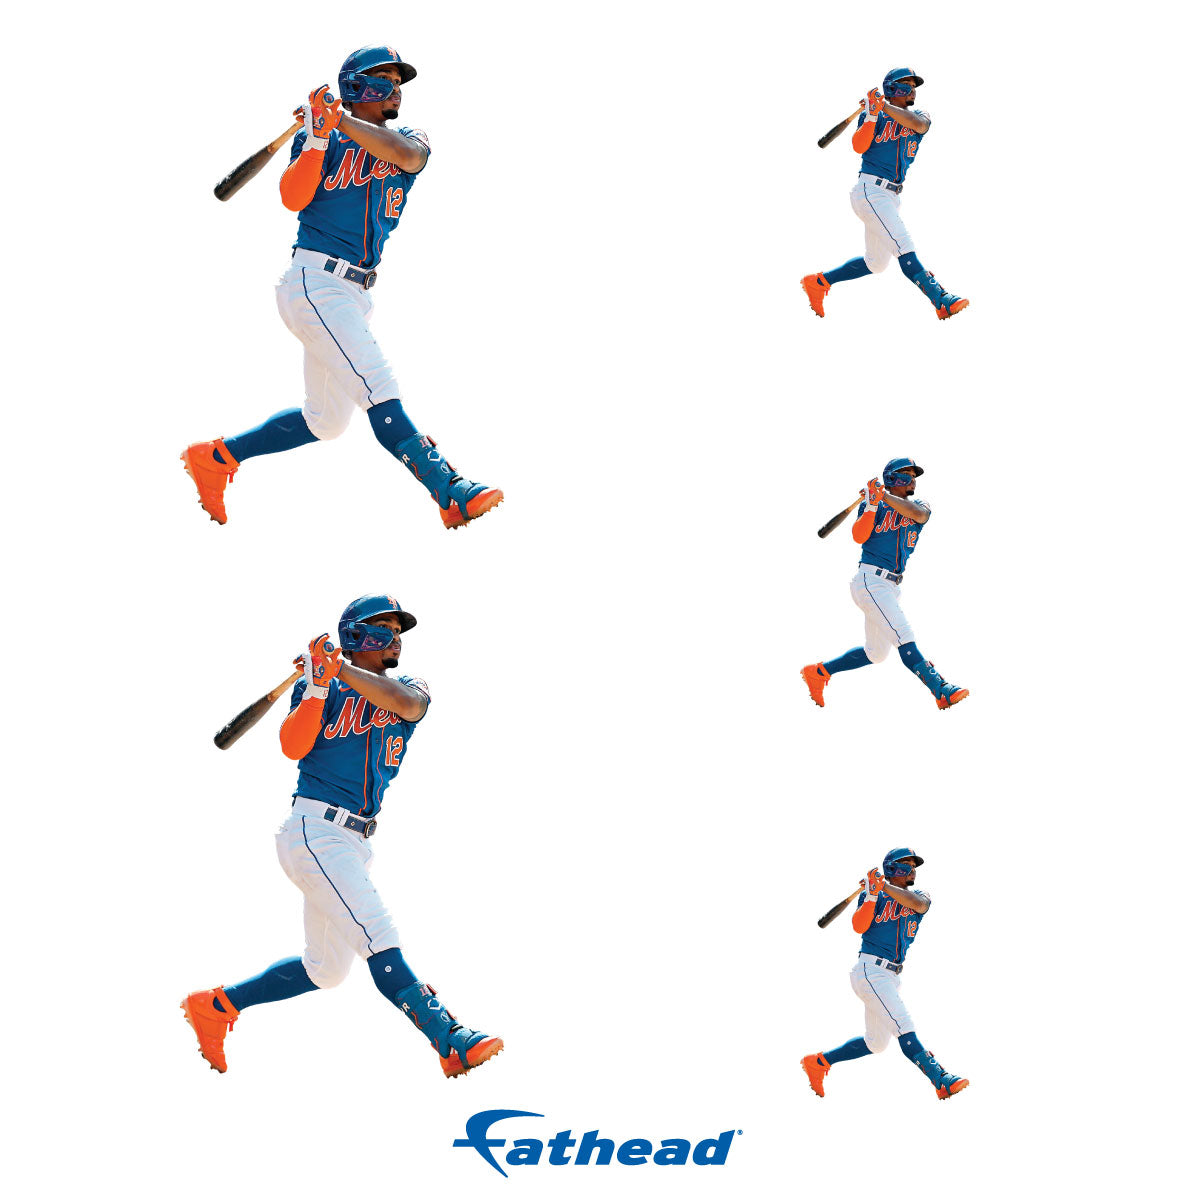 New York Mets: Francisco Lindor 2022 Celebration - Officially Licensed –  Fathead